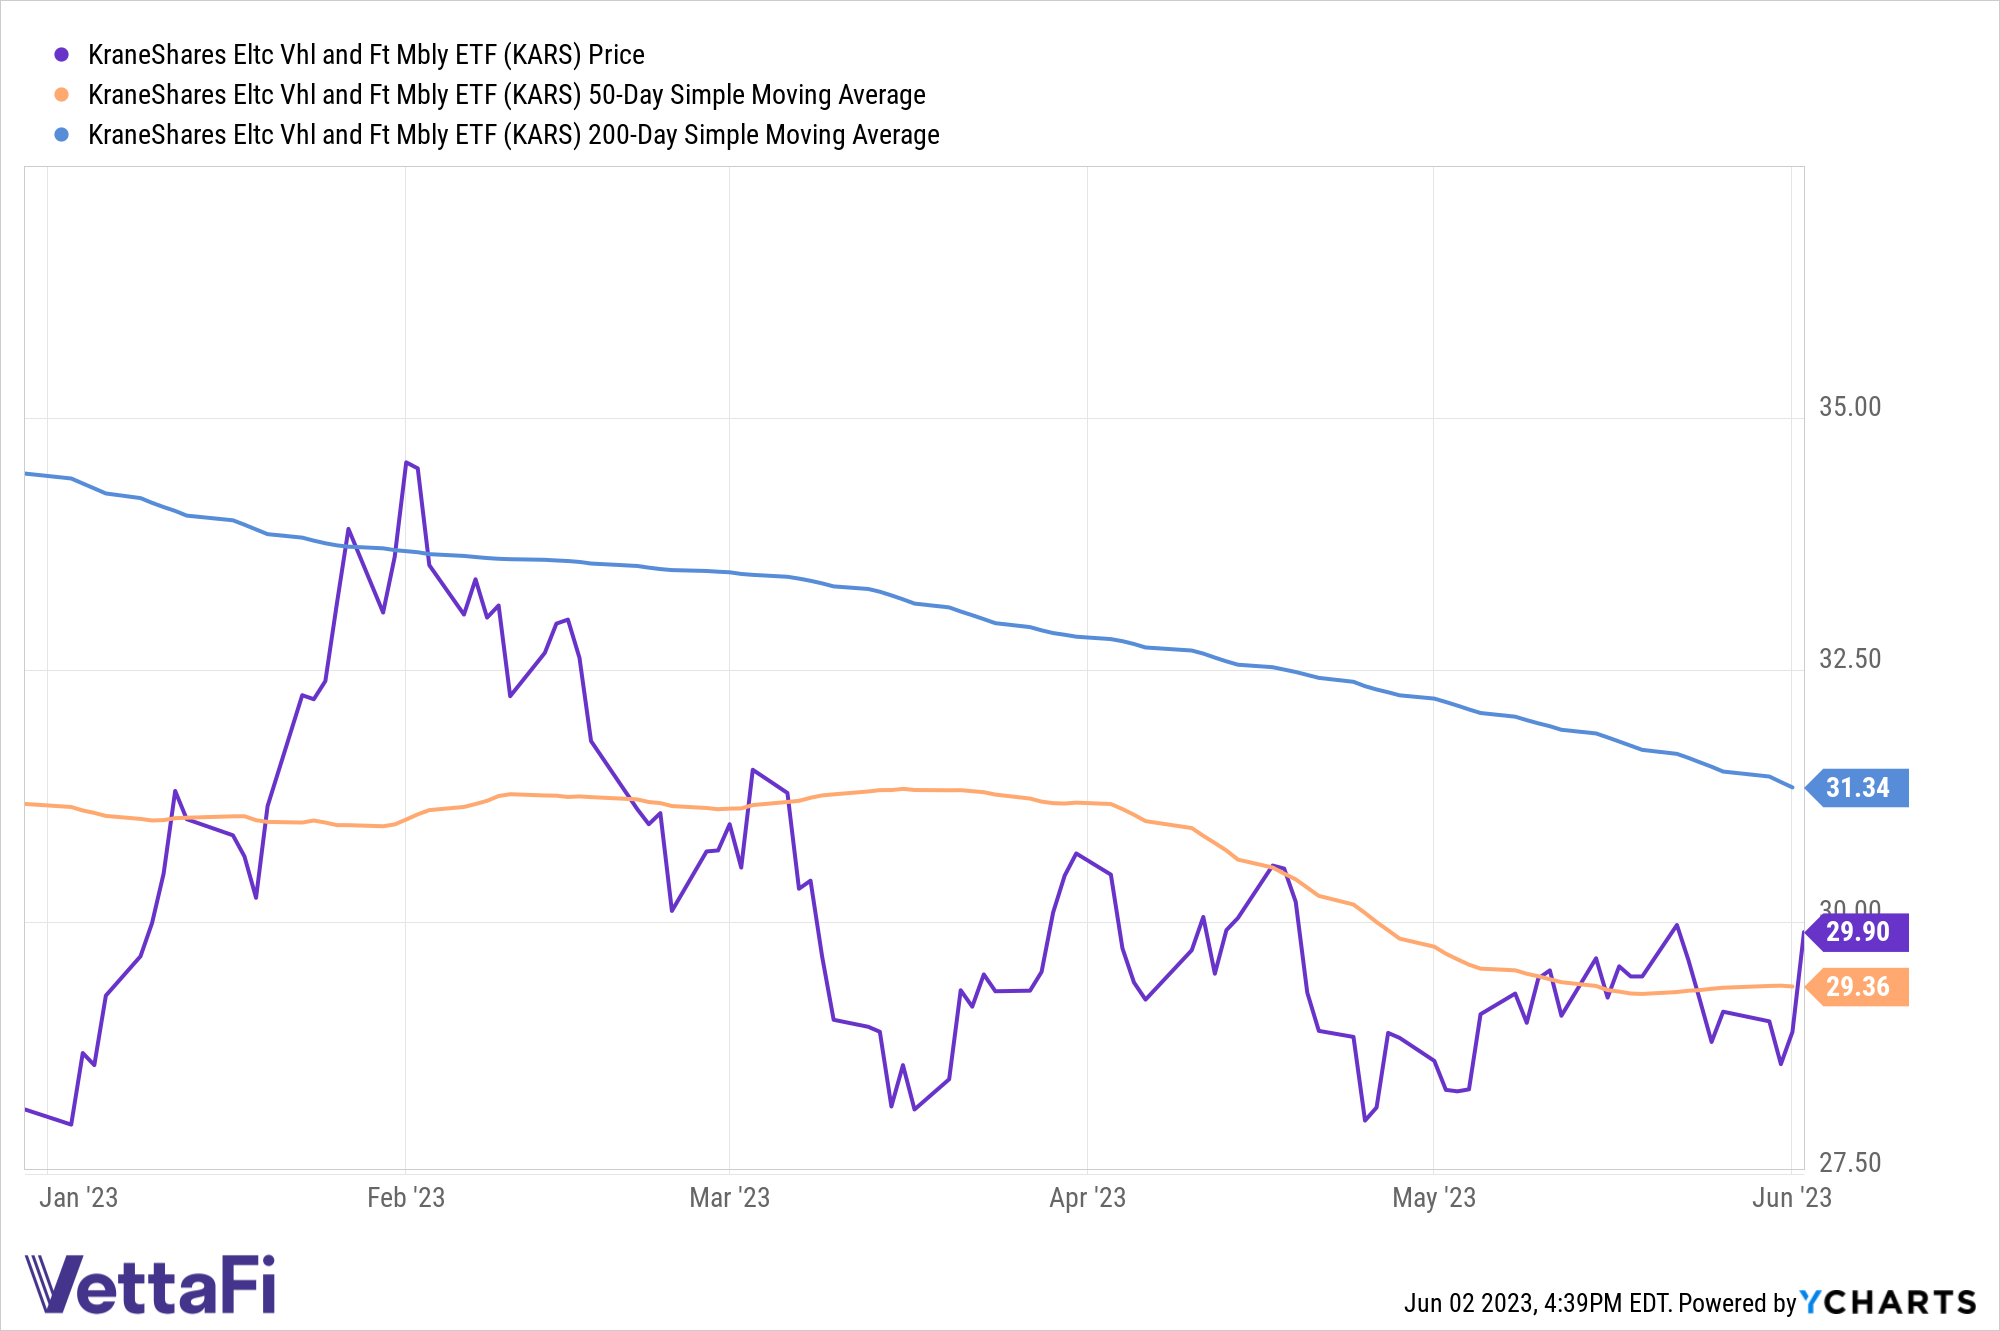 Graph of KARS price performance YTD as well as SMA comparisons. The fund (currently 29.90) is above its 50-day SMA of 29.36 but below its 200-day SMA of 31.34.